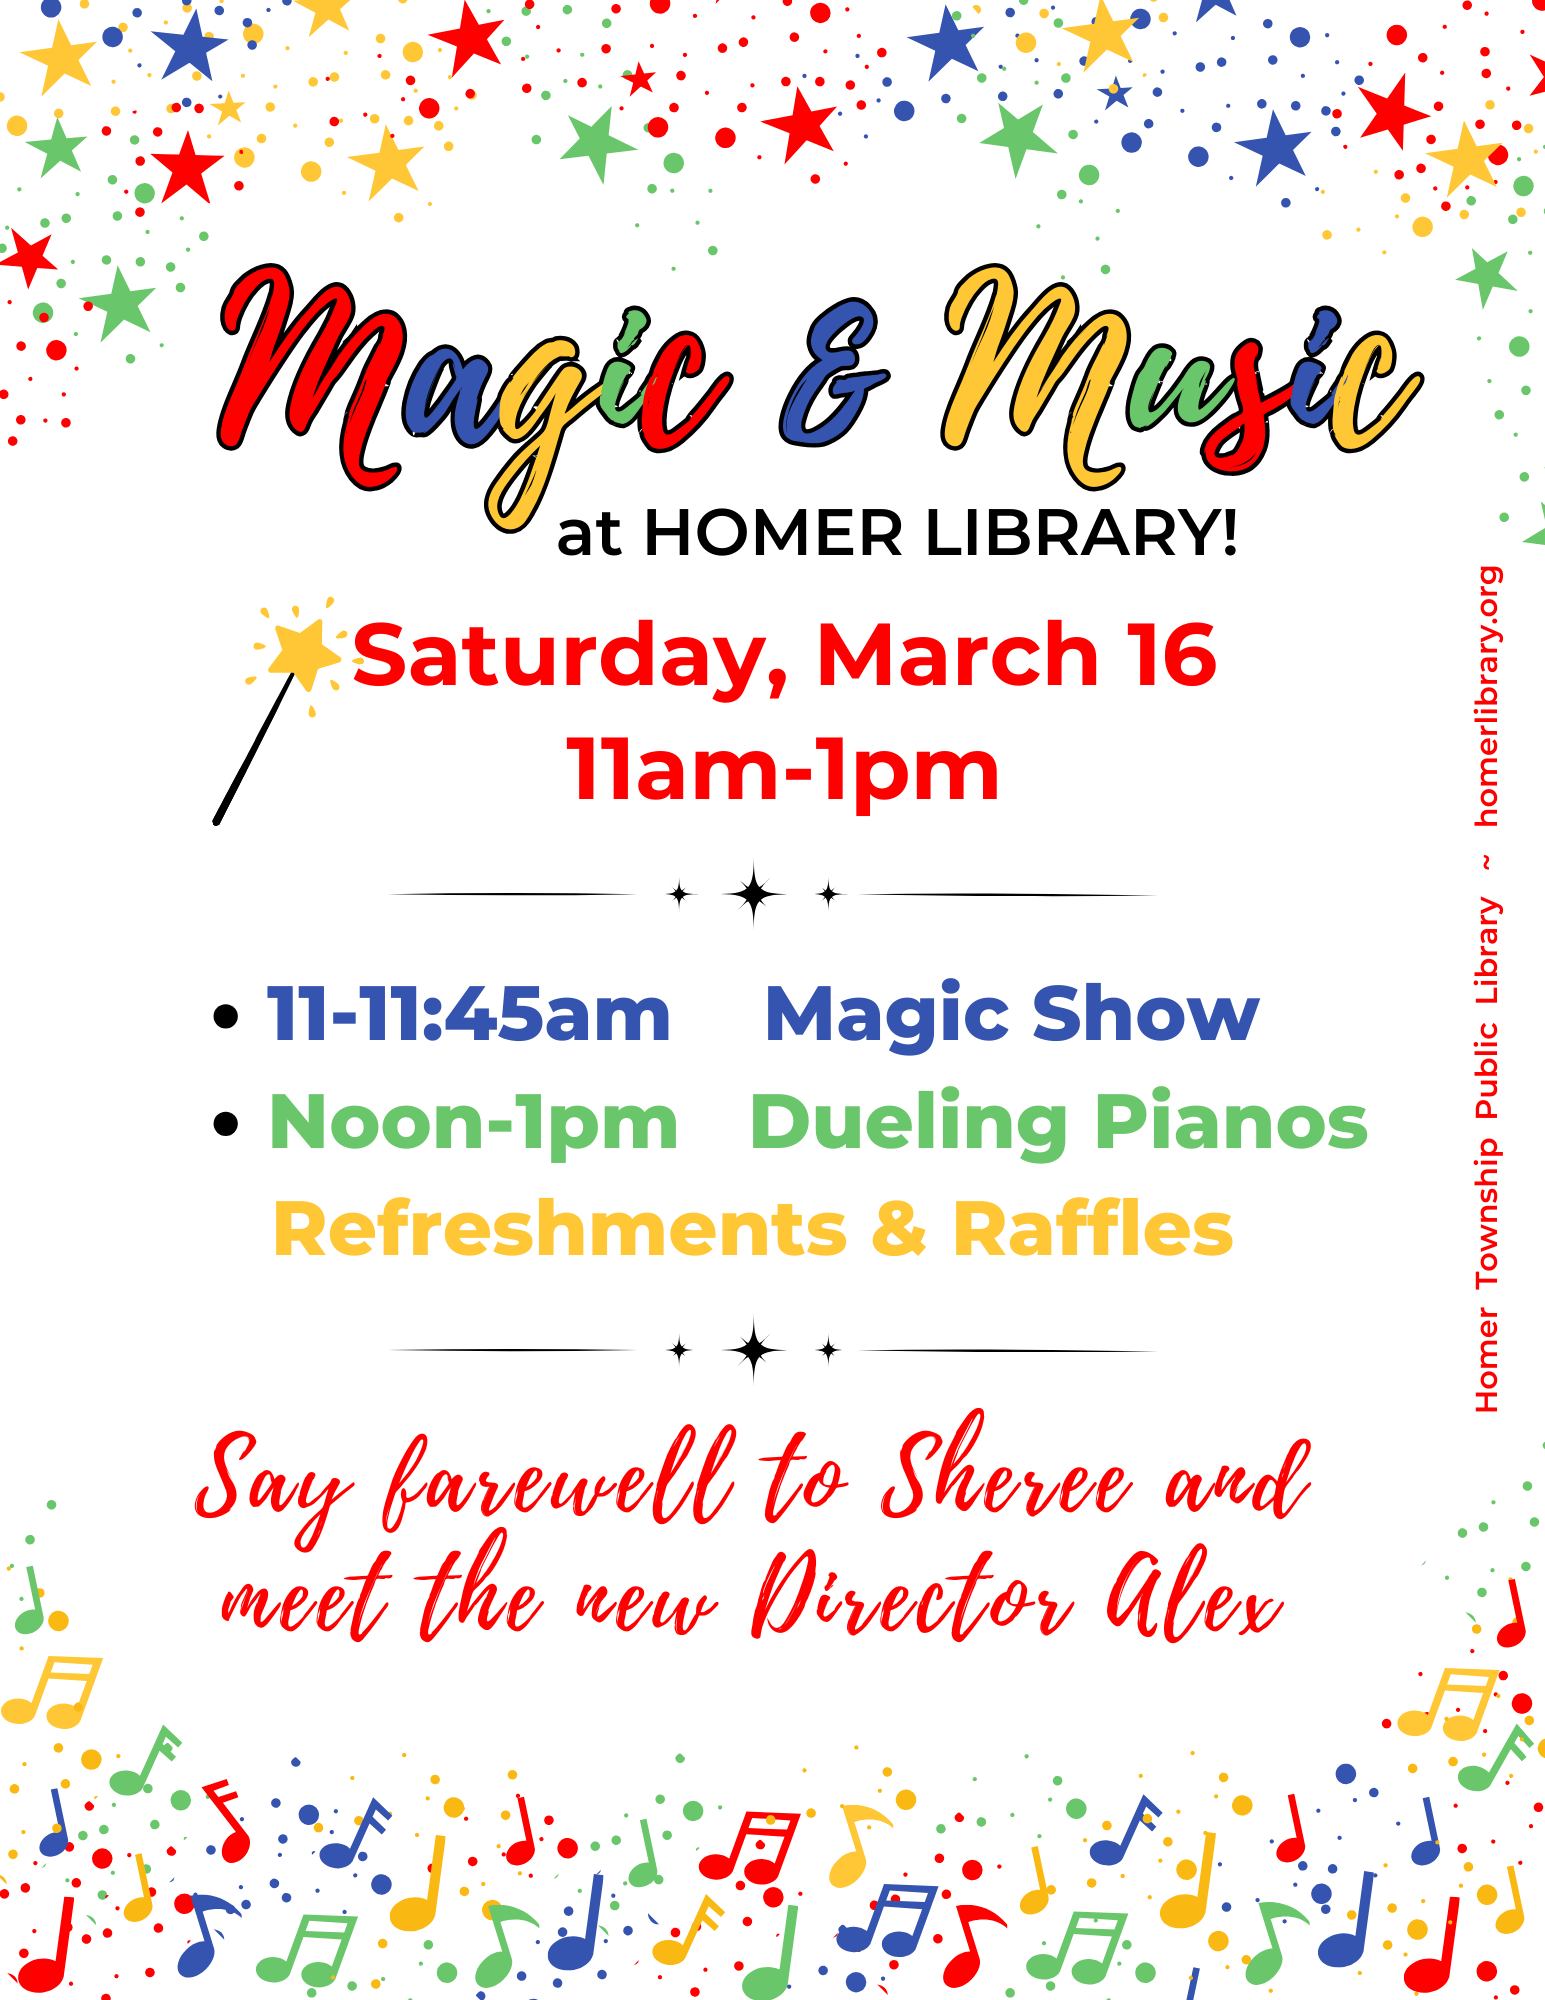 Text reads: Magic & Music at Homer Library! Saturday, March 16 11am-1pm. 11-11:45 Magic Show, Noon-1pm Dueling pianos, refreshments & raffles. Say farewell to Sheree and meet the new Director Alex. 